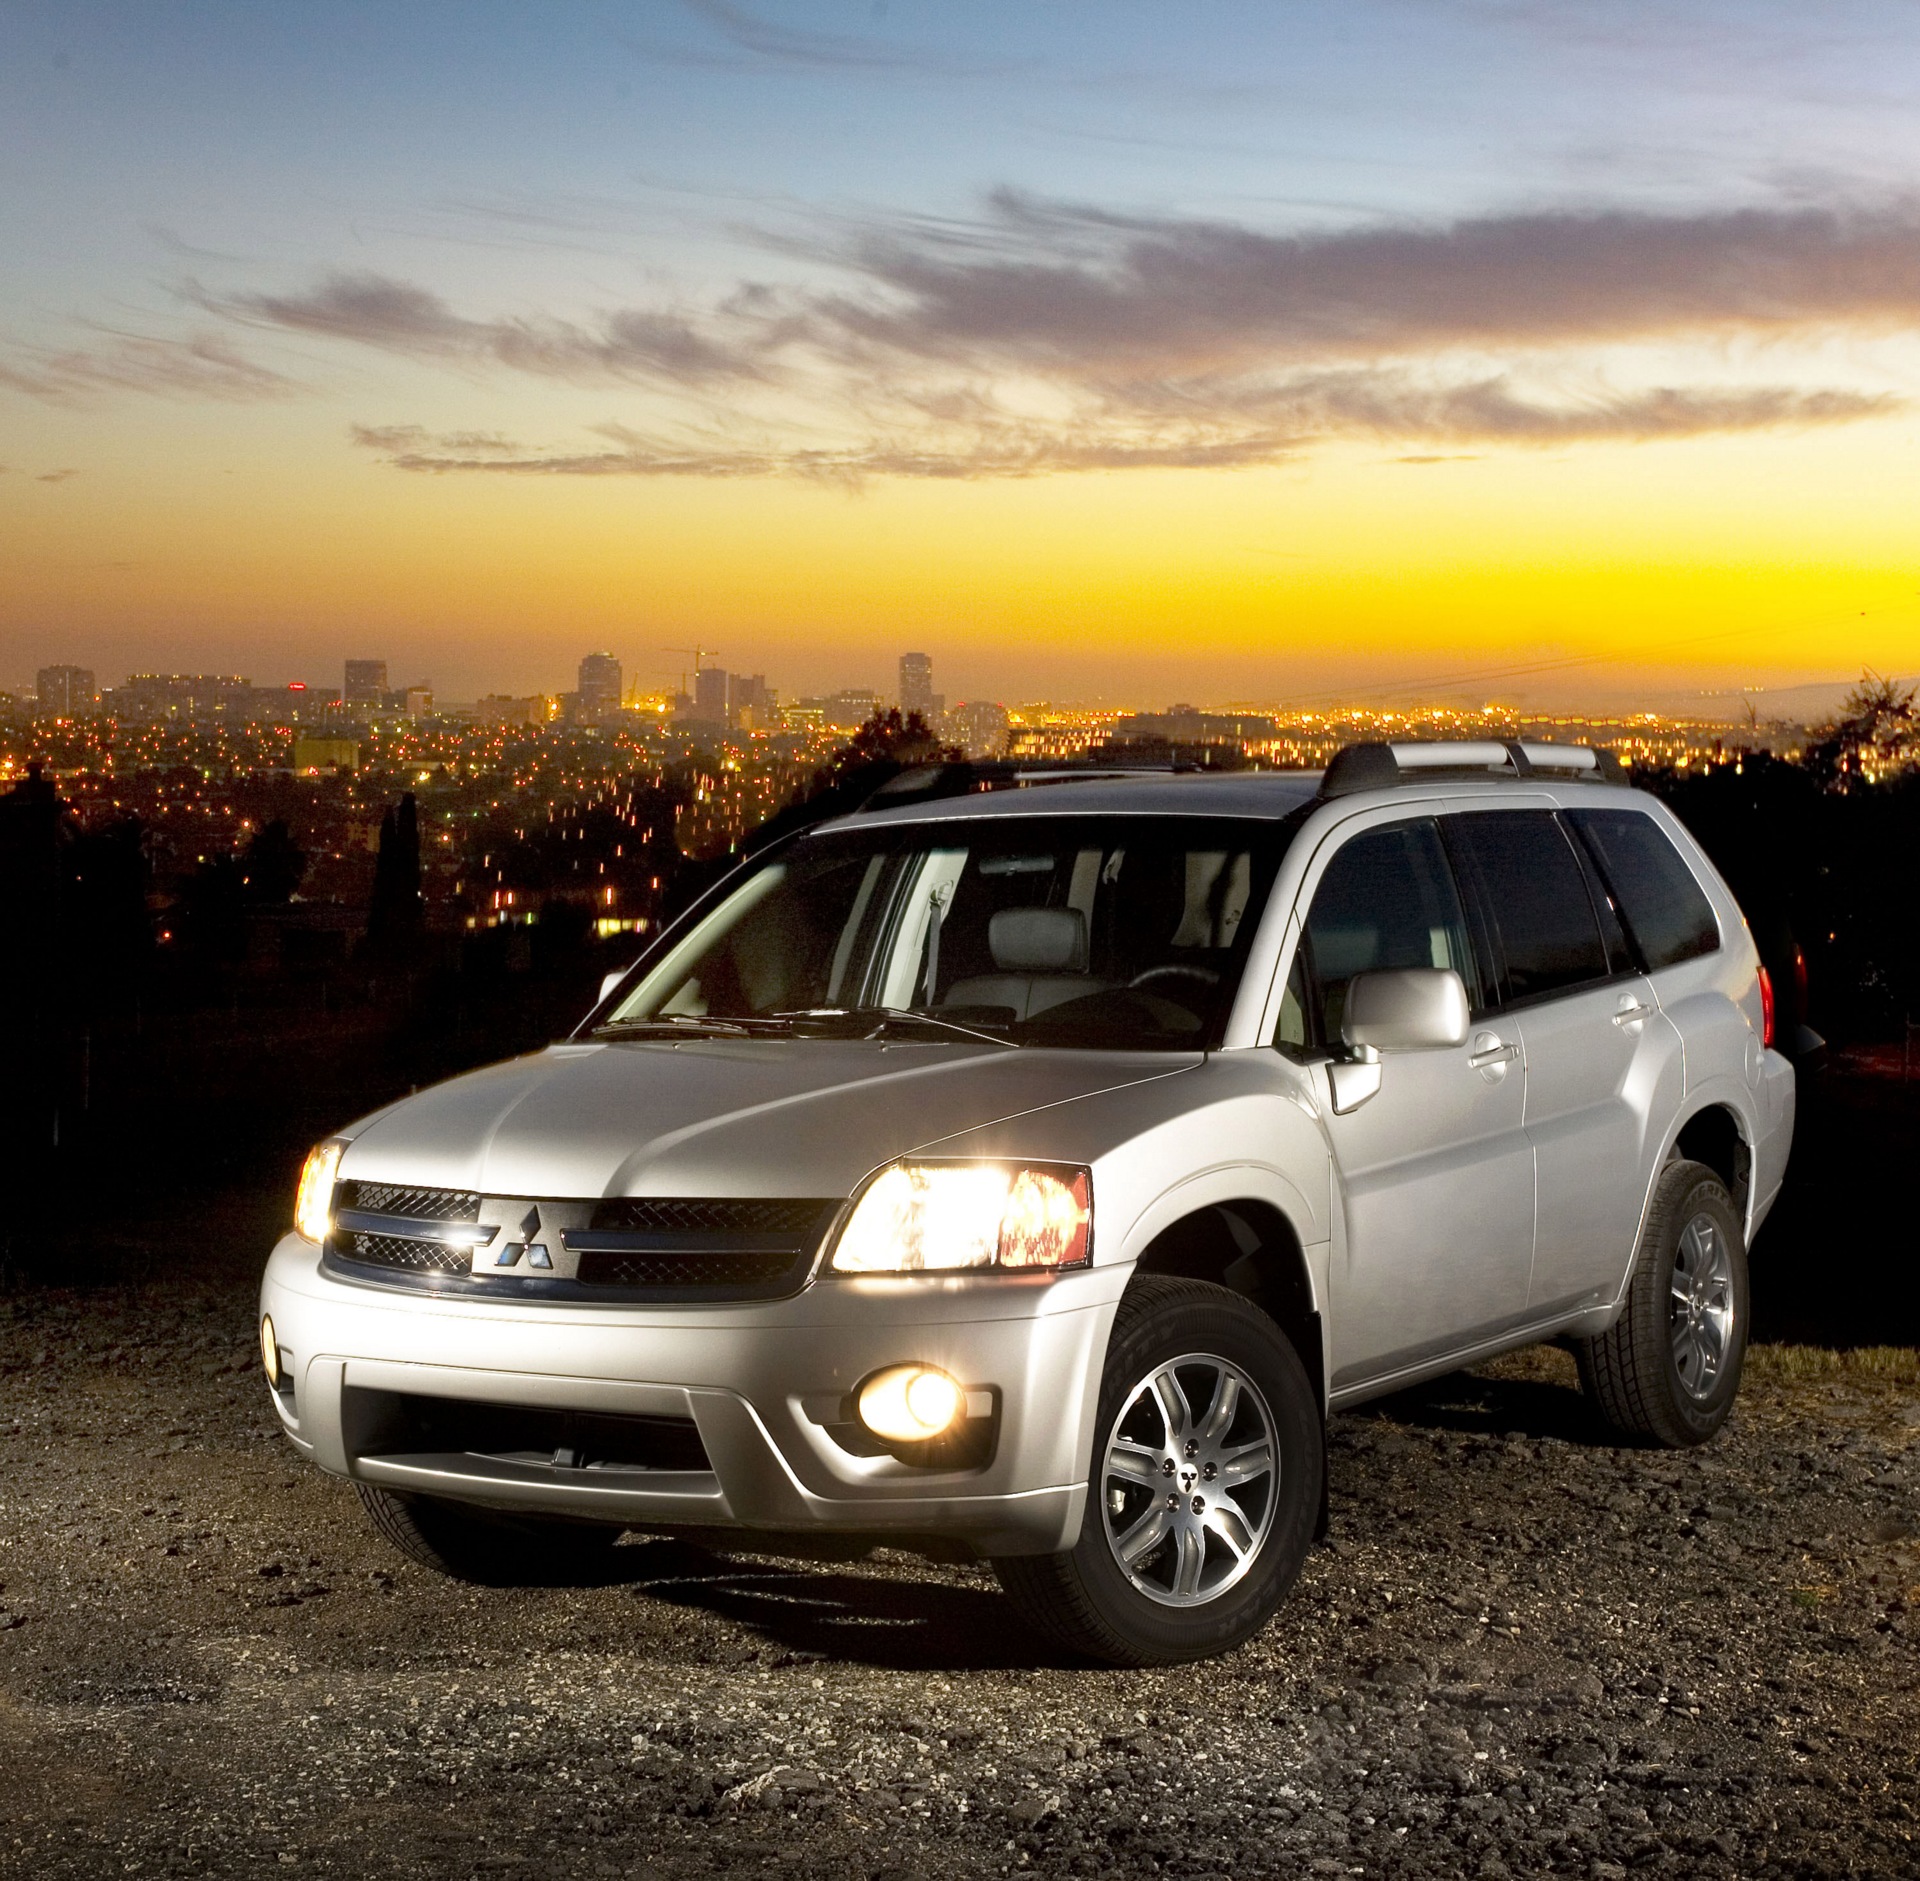 2008 Mitsubishi Endeavor Wallpaper and Image Gallery